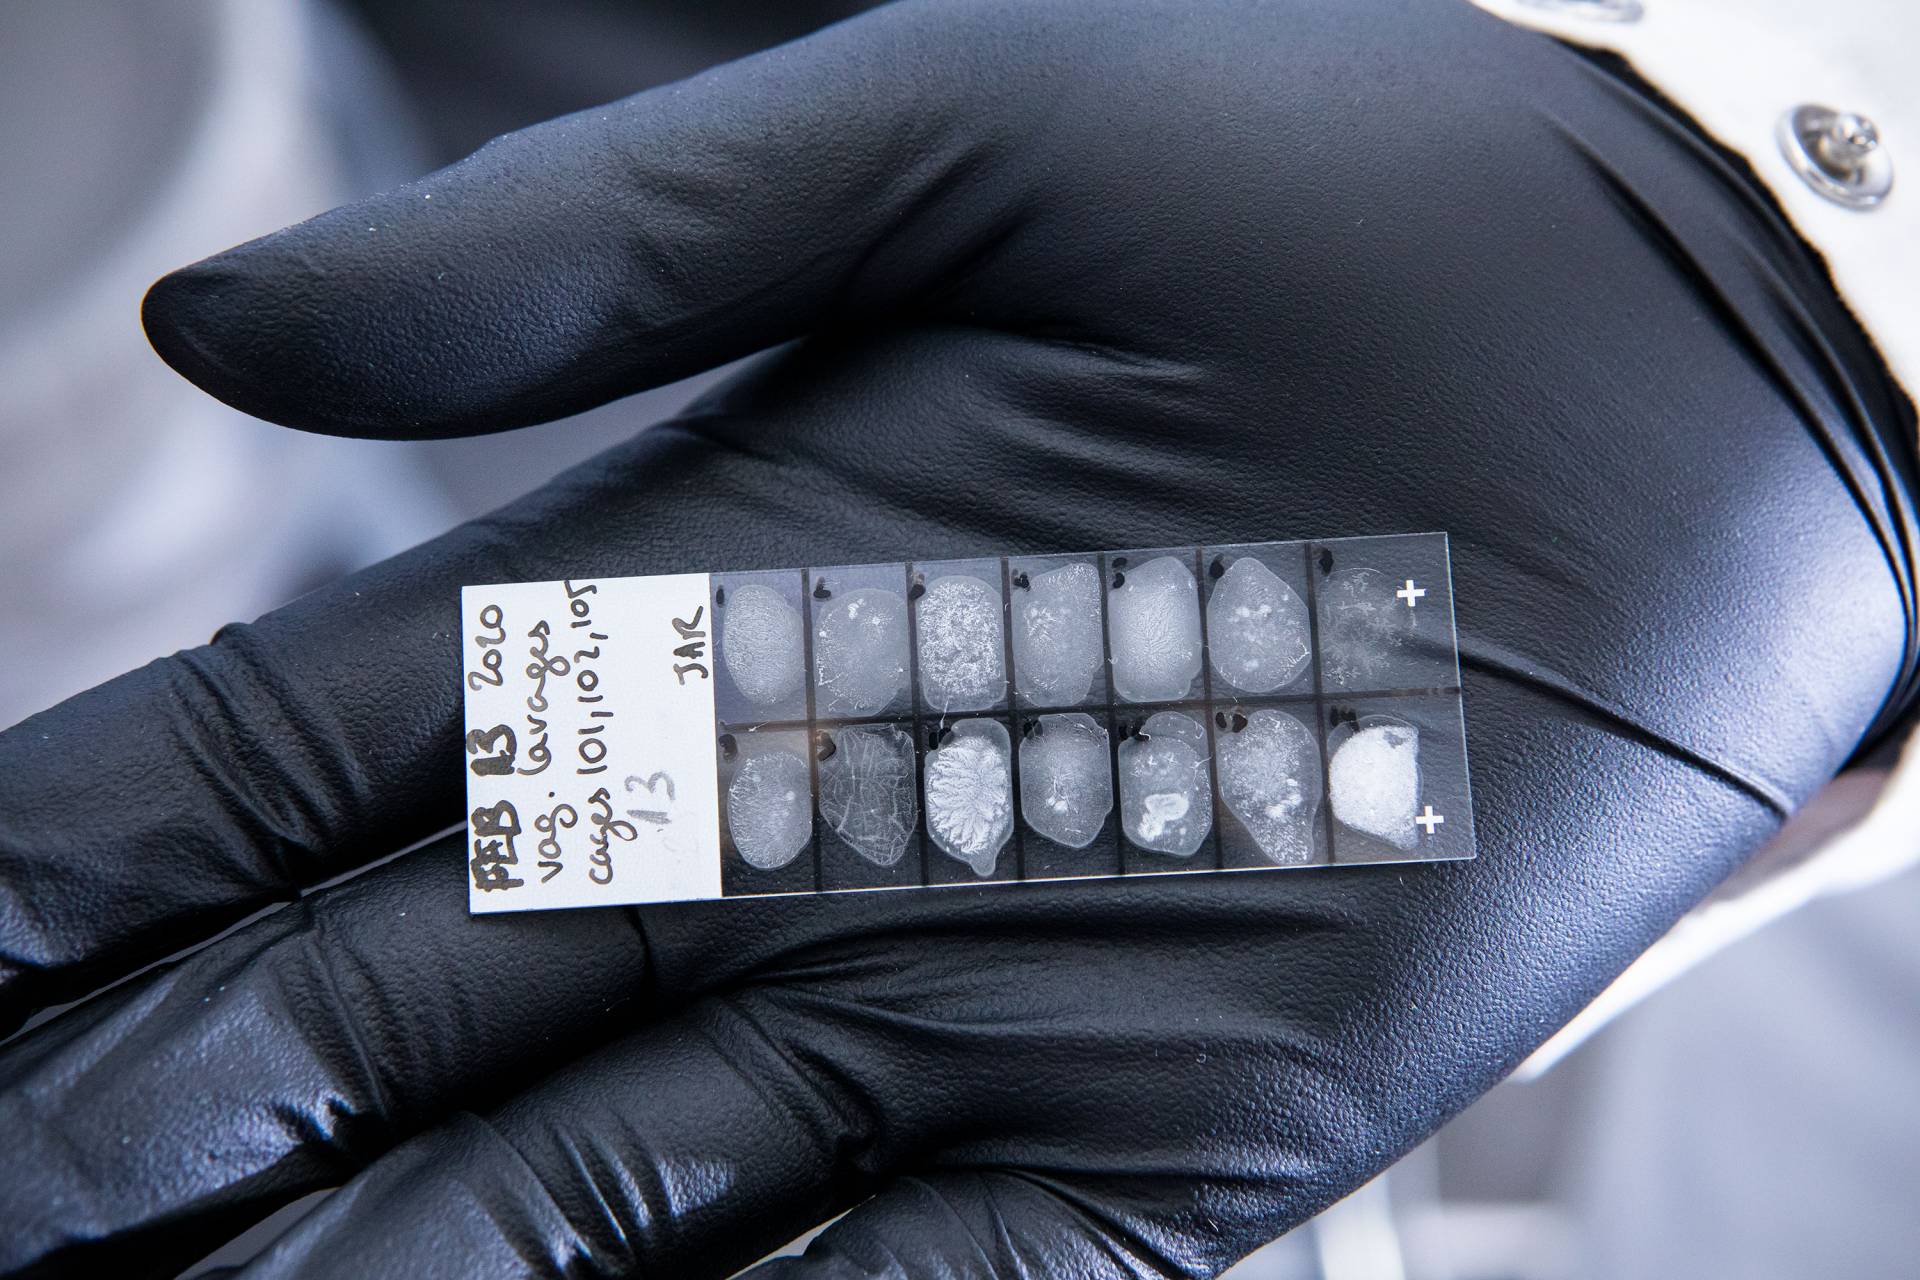 Lab samples in the palm of a nitrile gloved hand